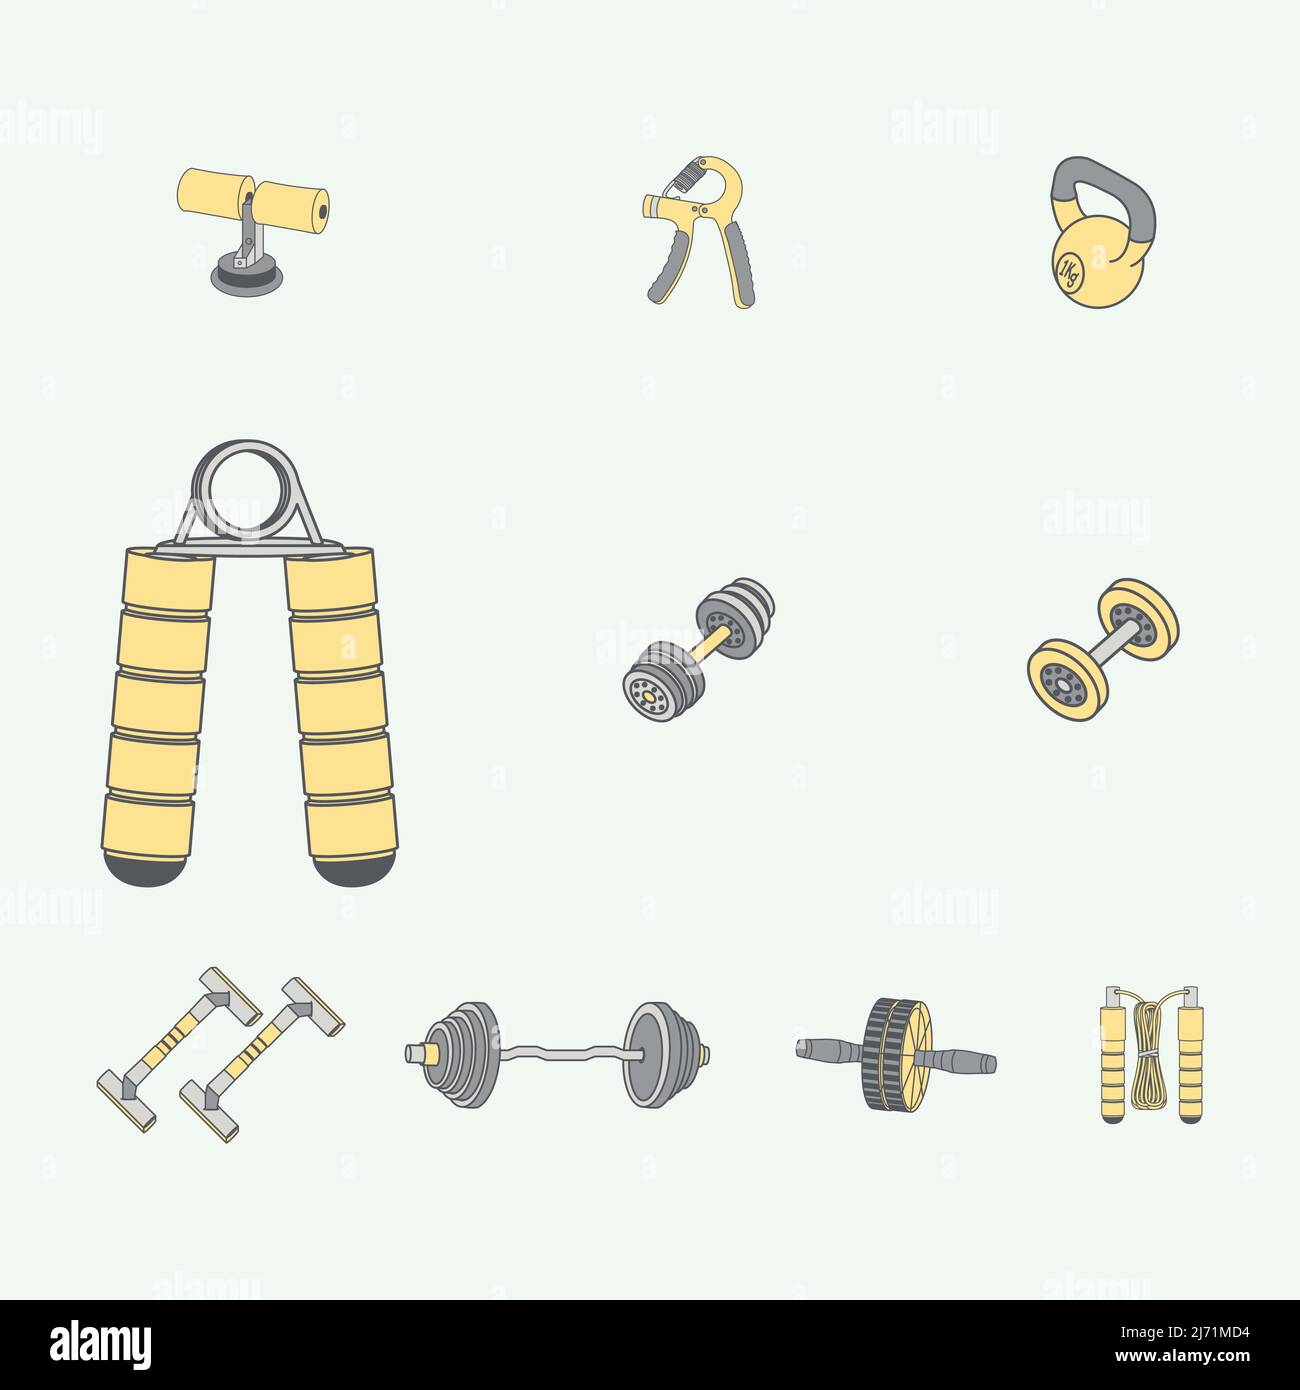 Gym Fitness Machines Tools Equipments List Stock Vector